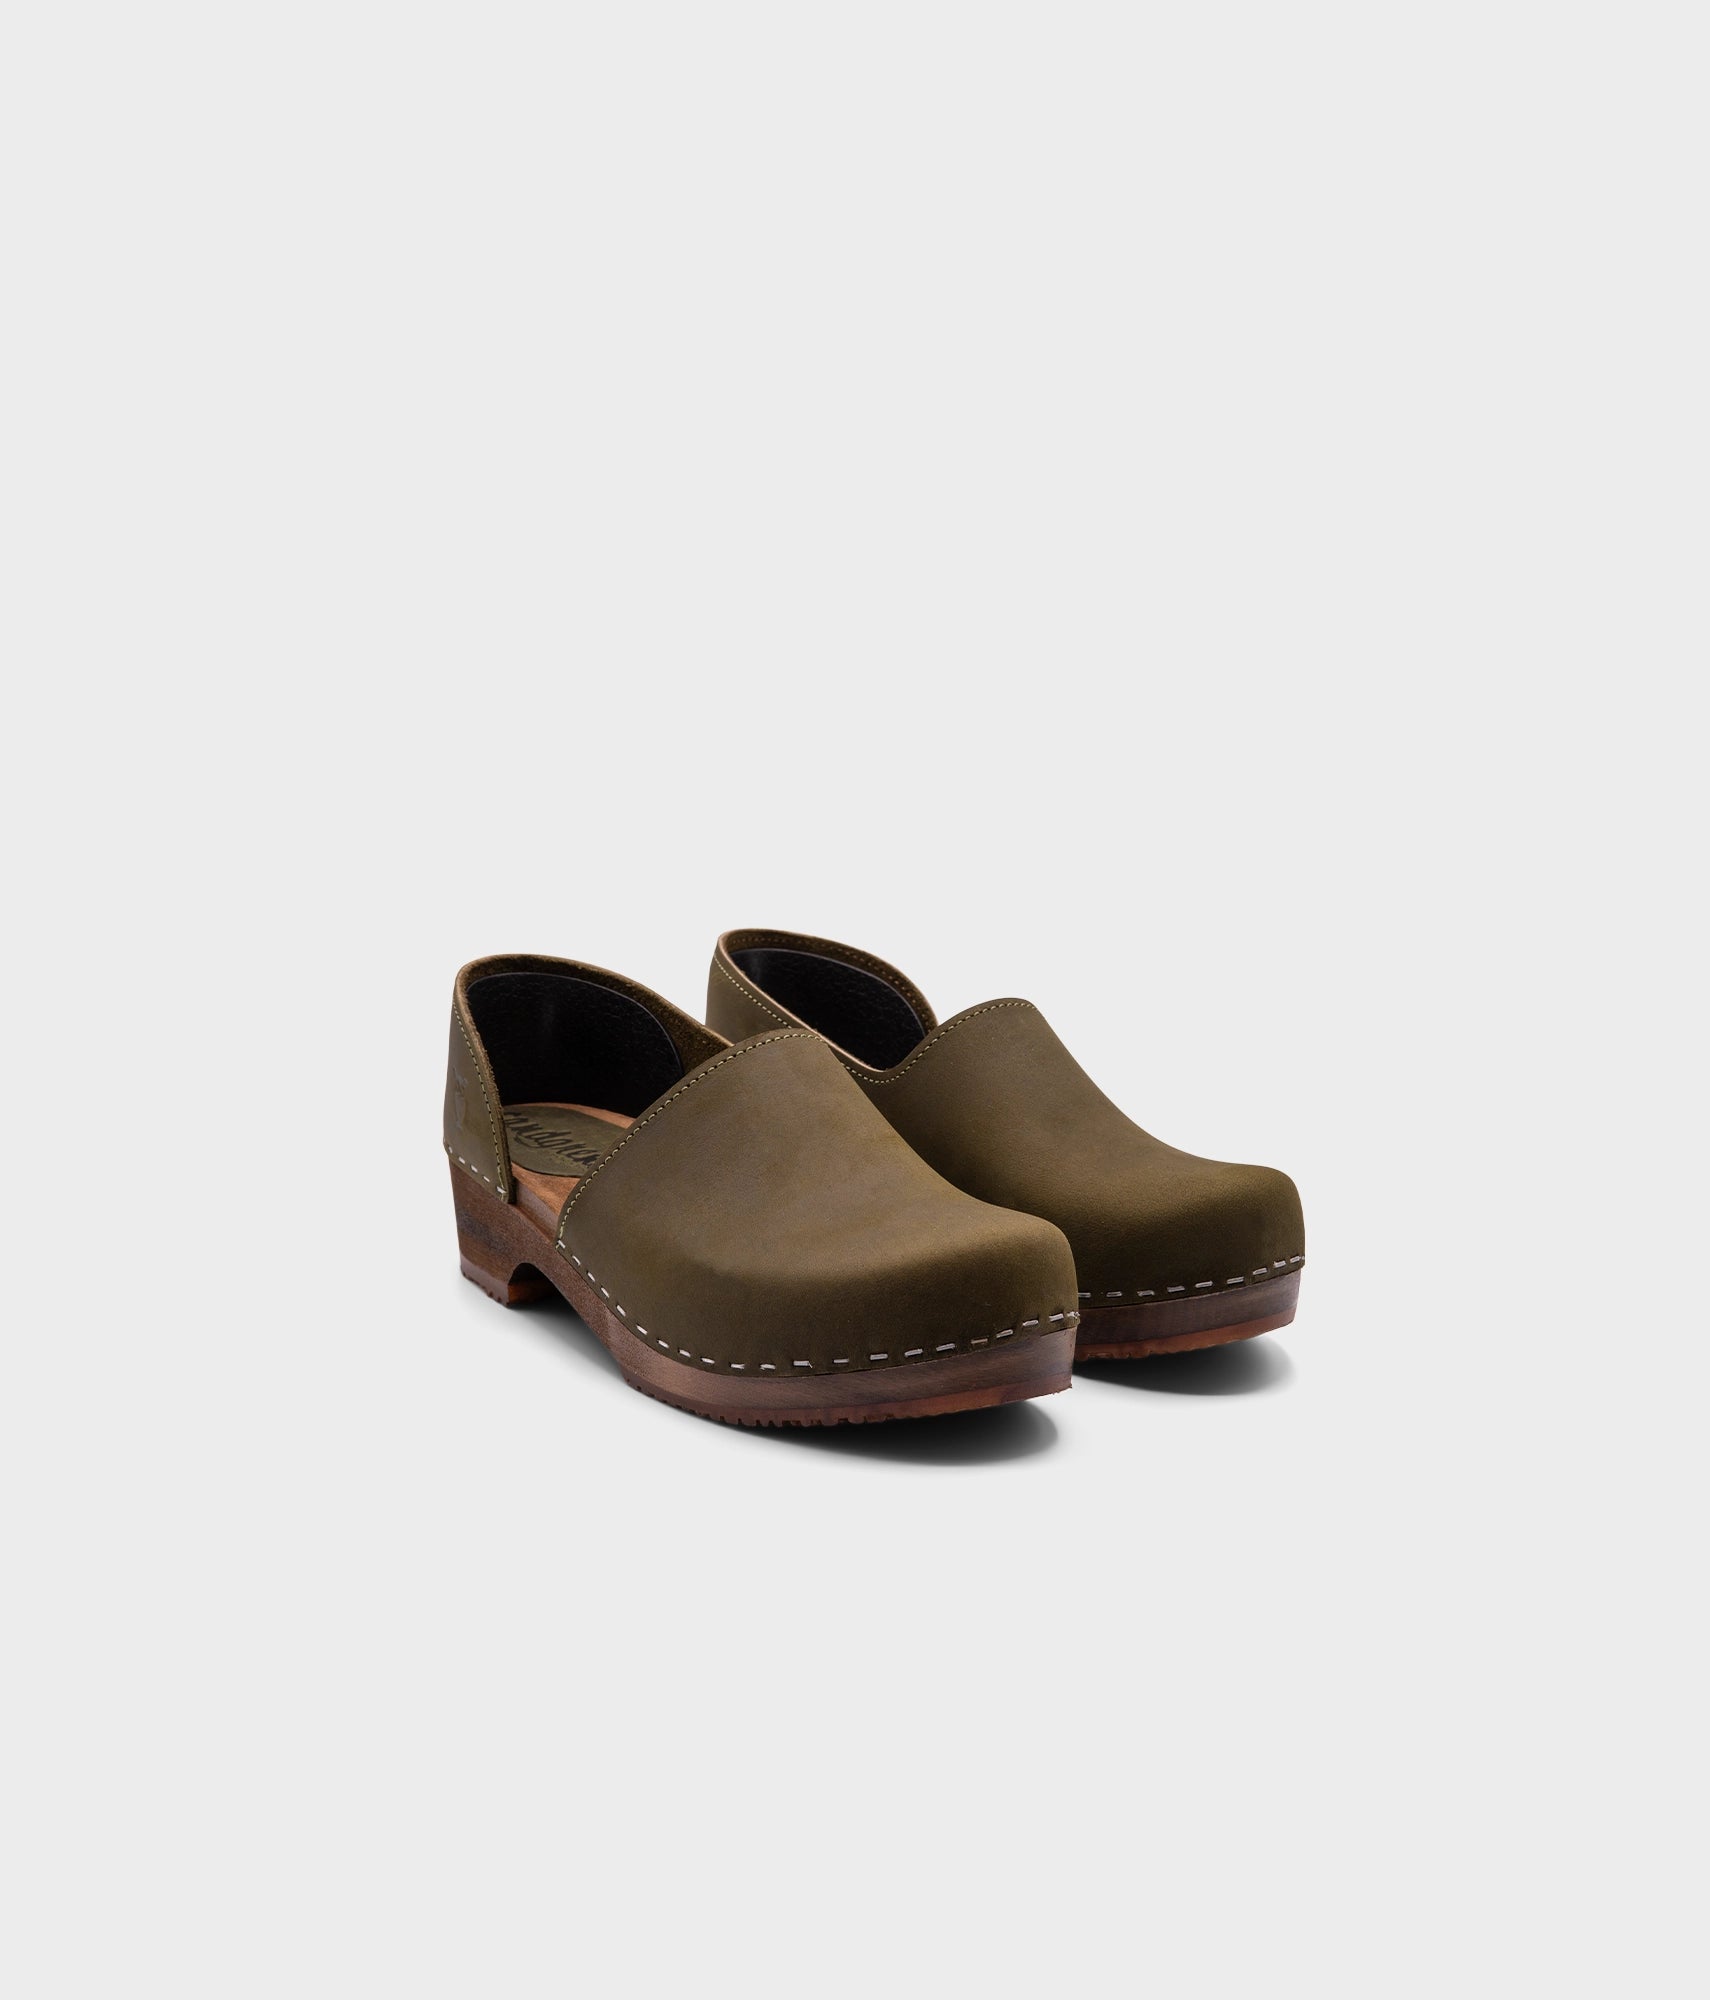 low heeled closed-back clogs in olive green nubuck leather stapled on a dark wooden base